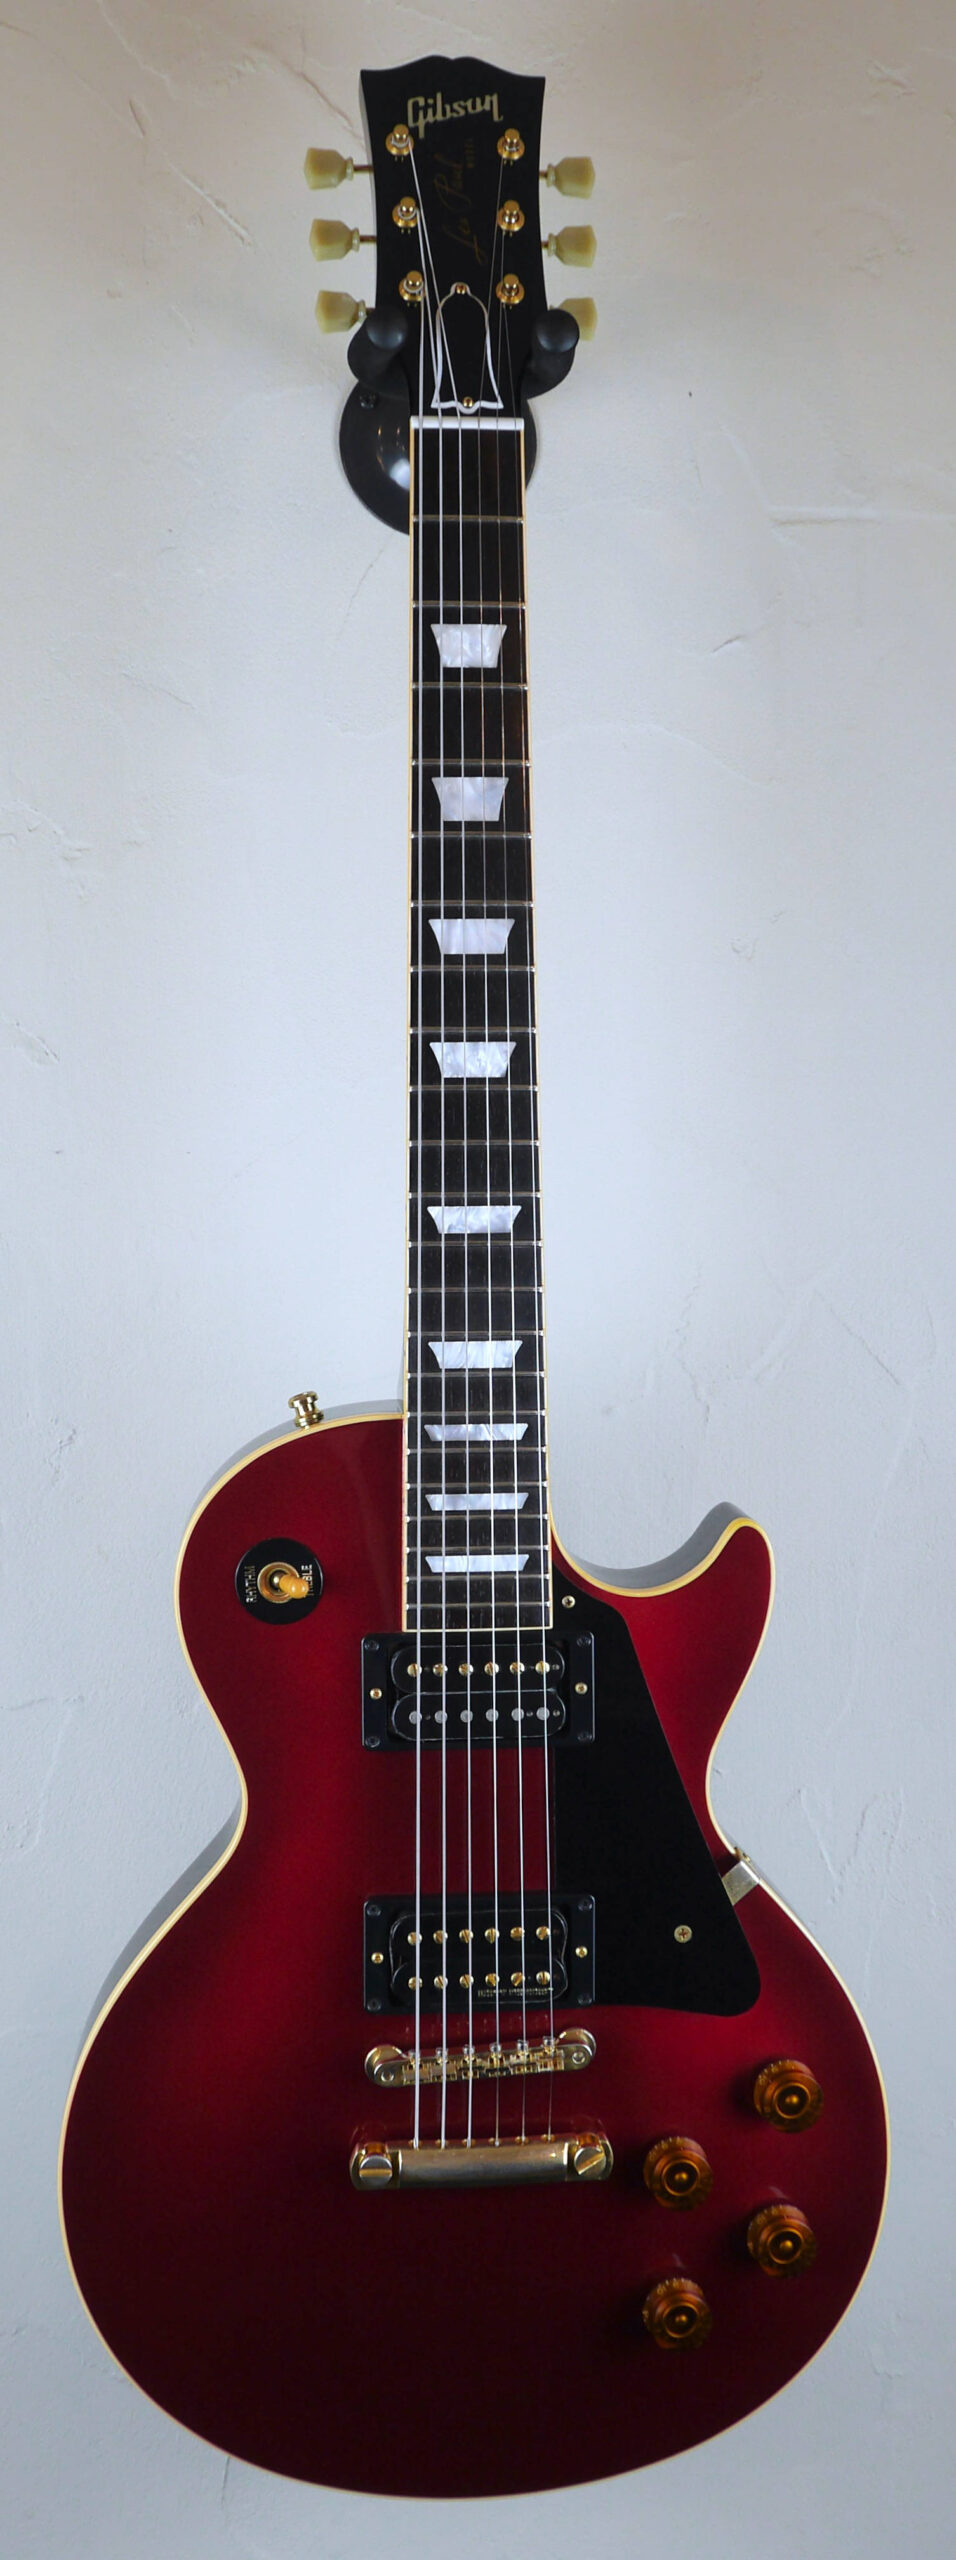 Gibson Custom Shop Limited Edition of 20 Les Paul Standard 2008 Candy Apple Red 2